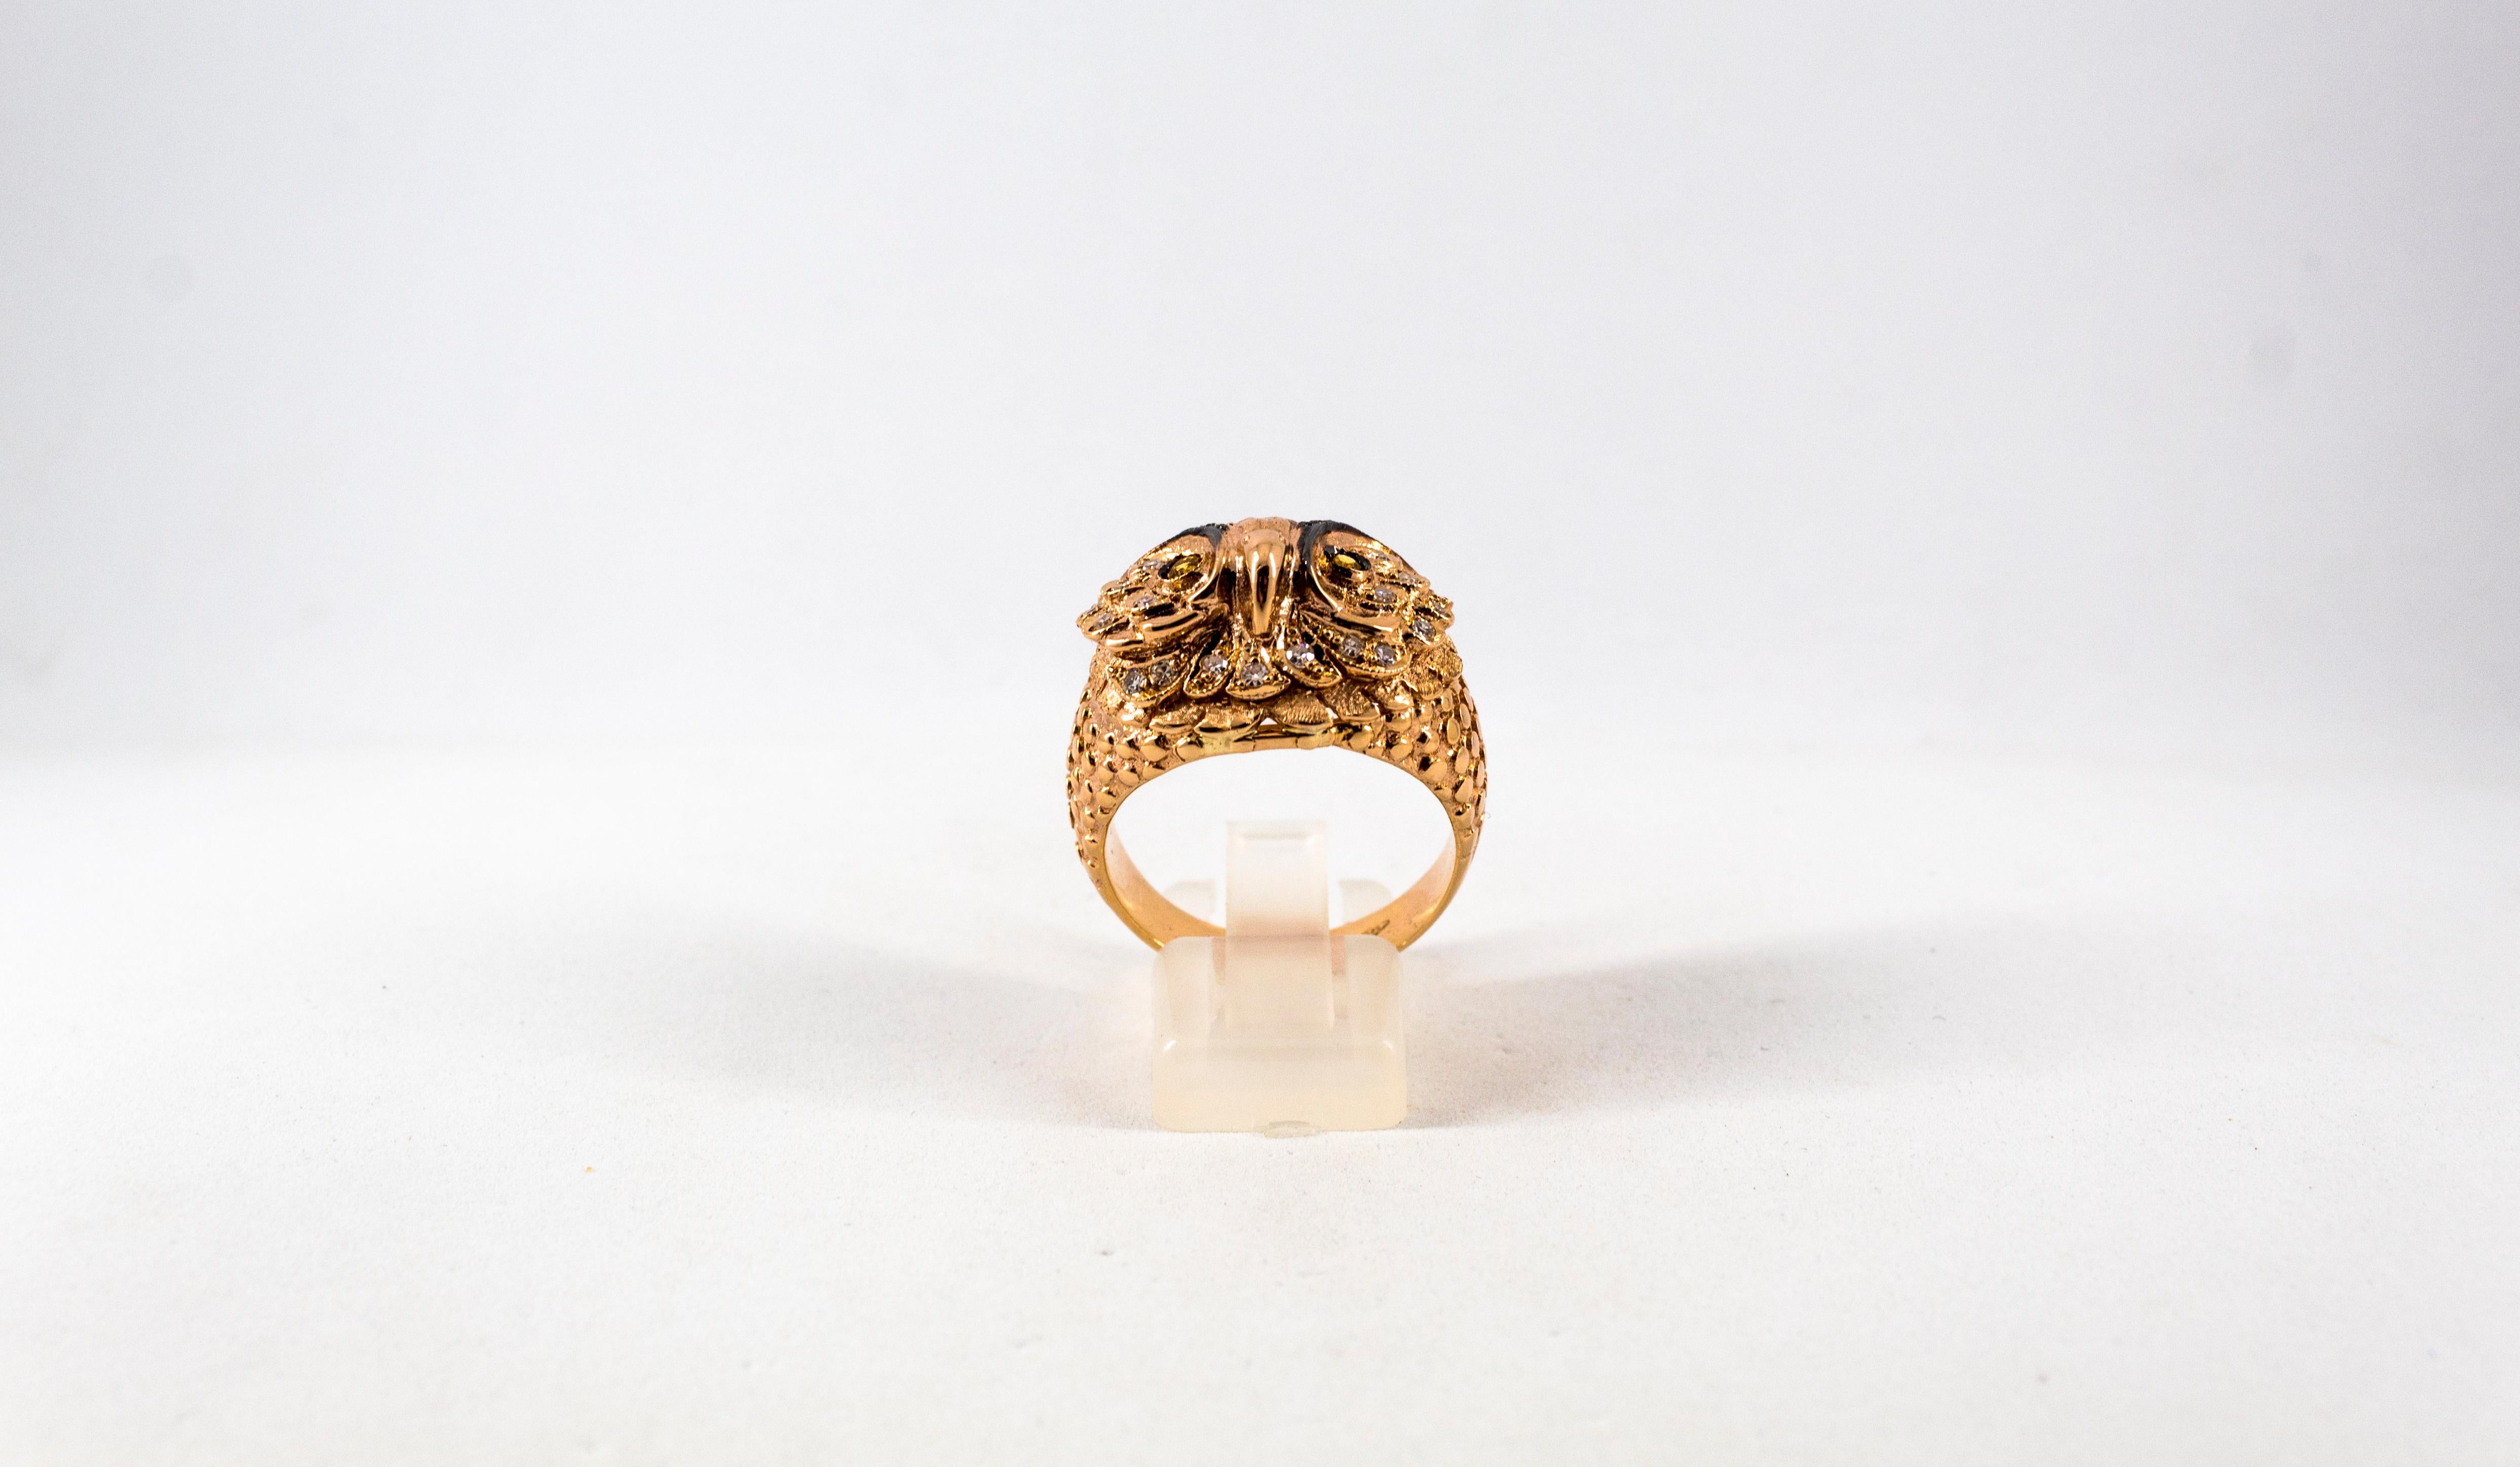 This Ring is made of 14K Yellow Gold.
This Ring has 0.42 Carats of White Diamonds.
This Ring has 0.13 Carats of Black Diamonds.
This Ring has 0.10 Carats of Yellow Sapphires.
Size ITA: 22 USA: 10
We're a workshop so every piece is handmade,